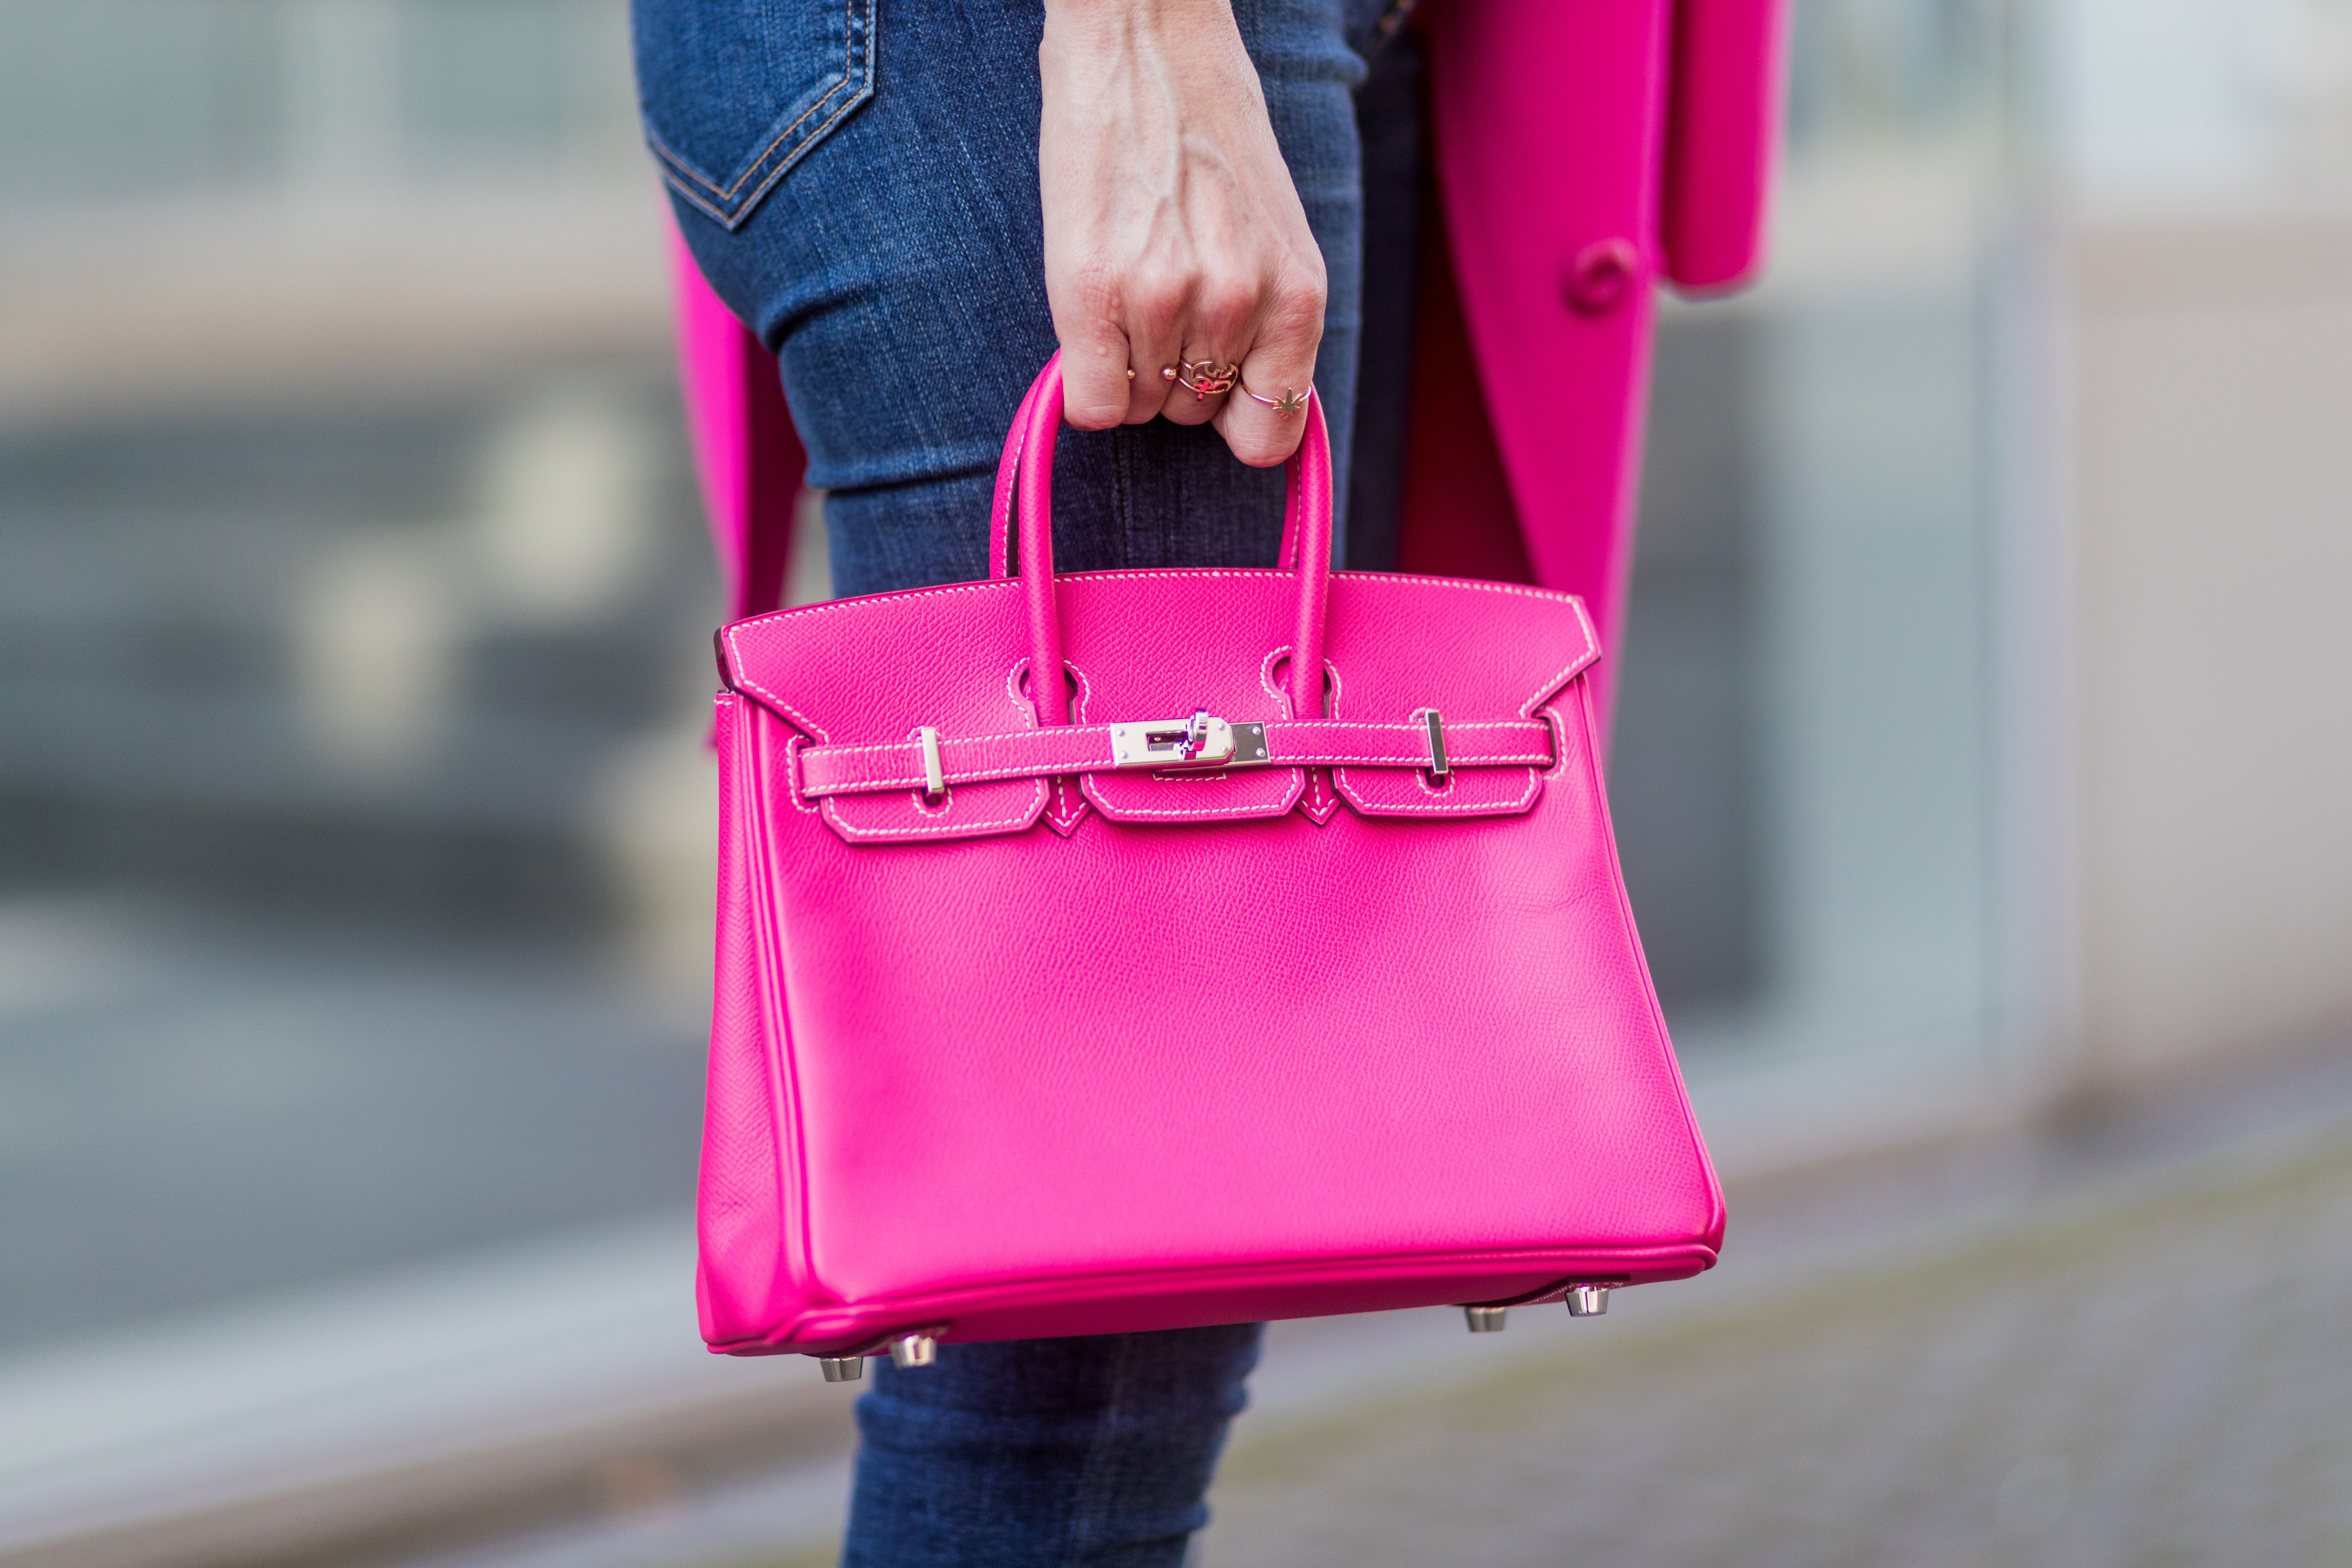 The Hermès Birkin bag: Everything you need to know about the